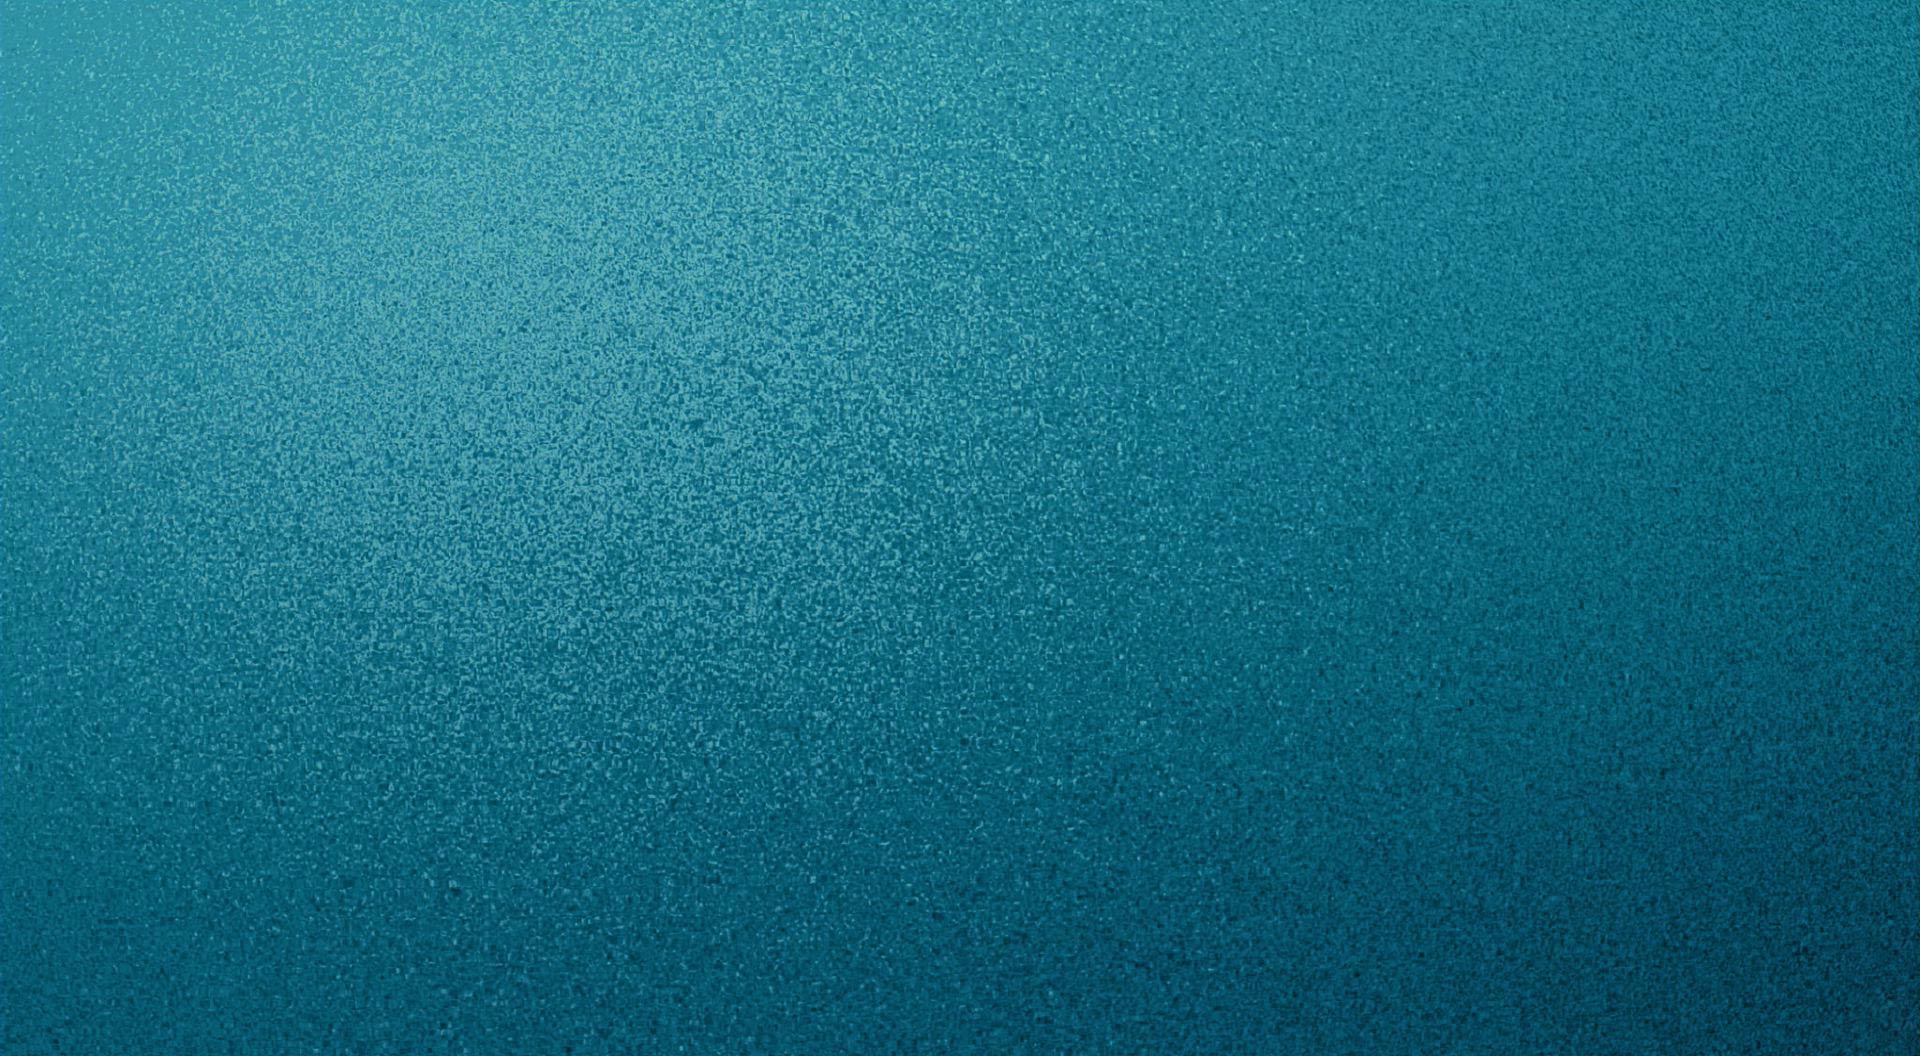 Aqua Textures Ppt Background For Your Powerpoint Templates